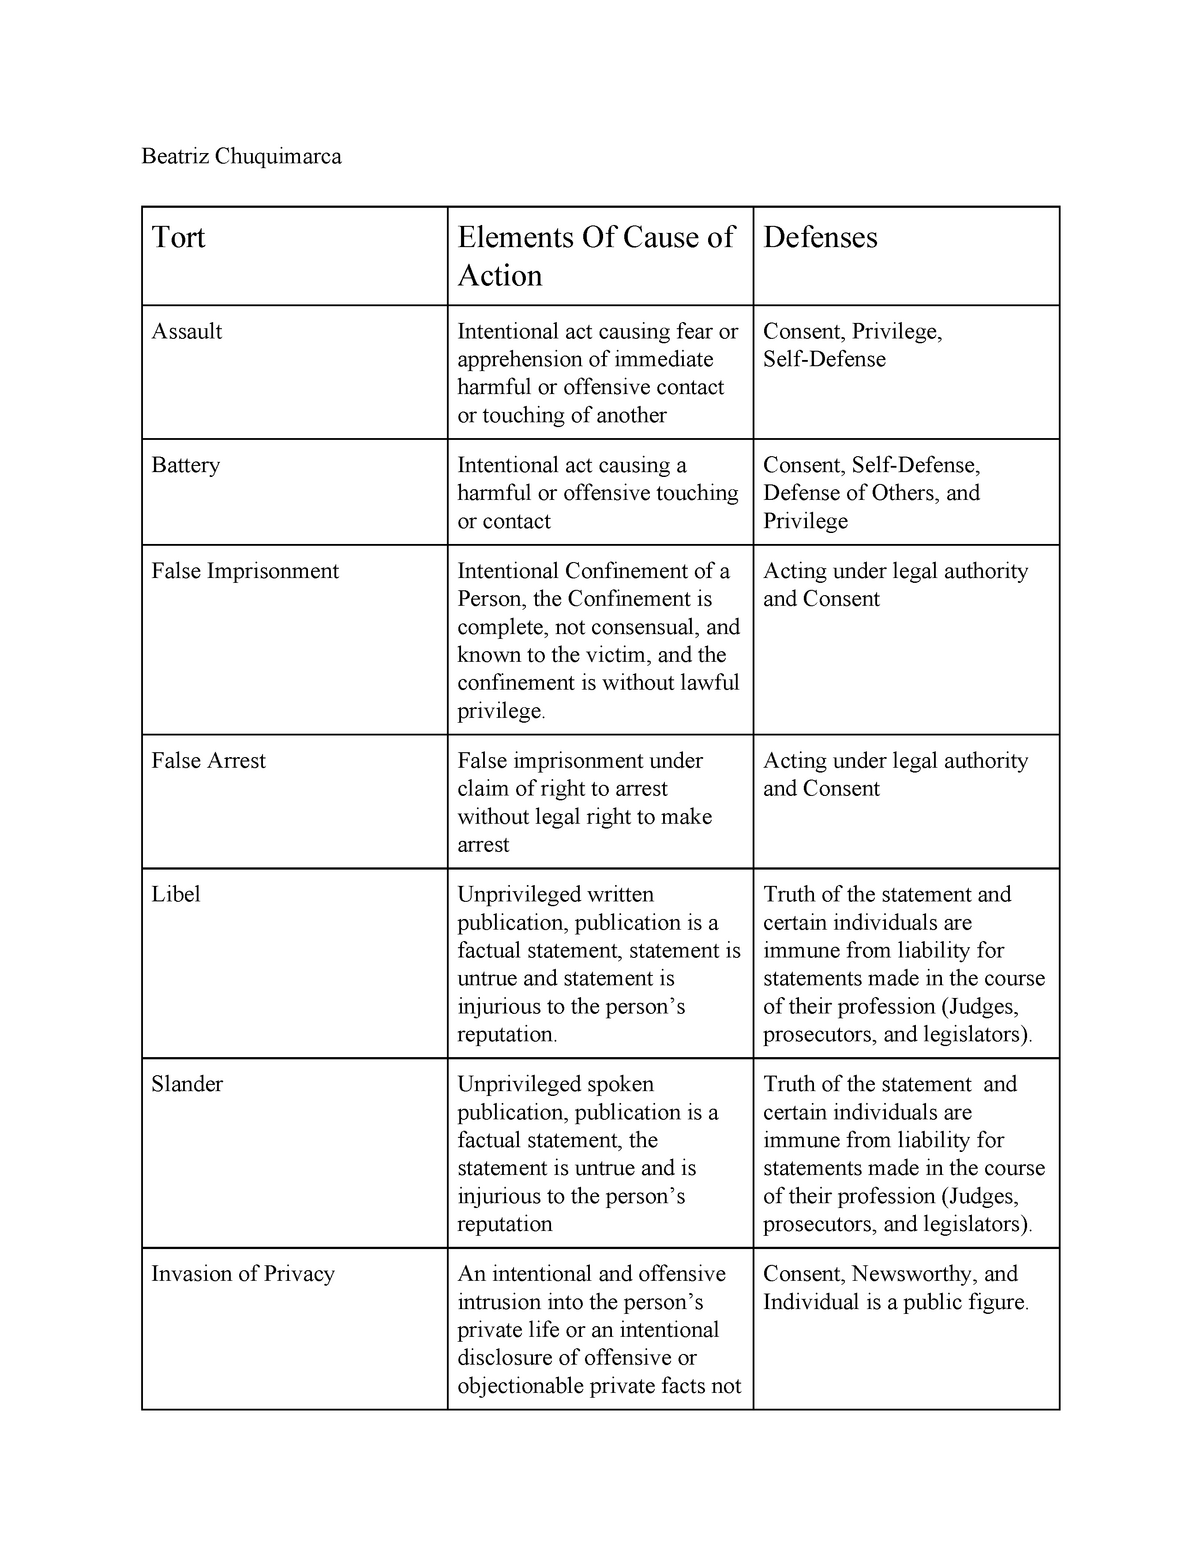 Intentional Tort Law Chart Beatriz Chuquimarca Tort Elements Of Cause